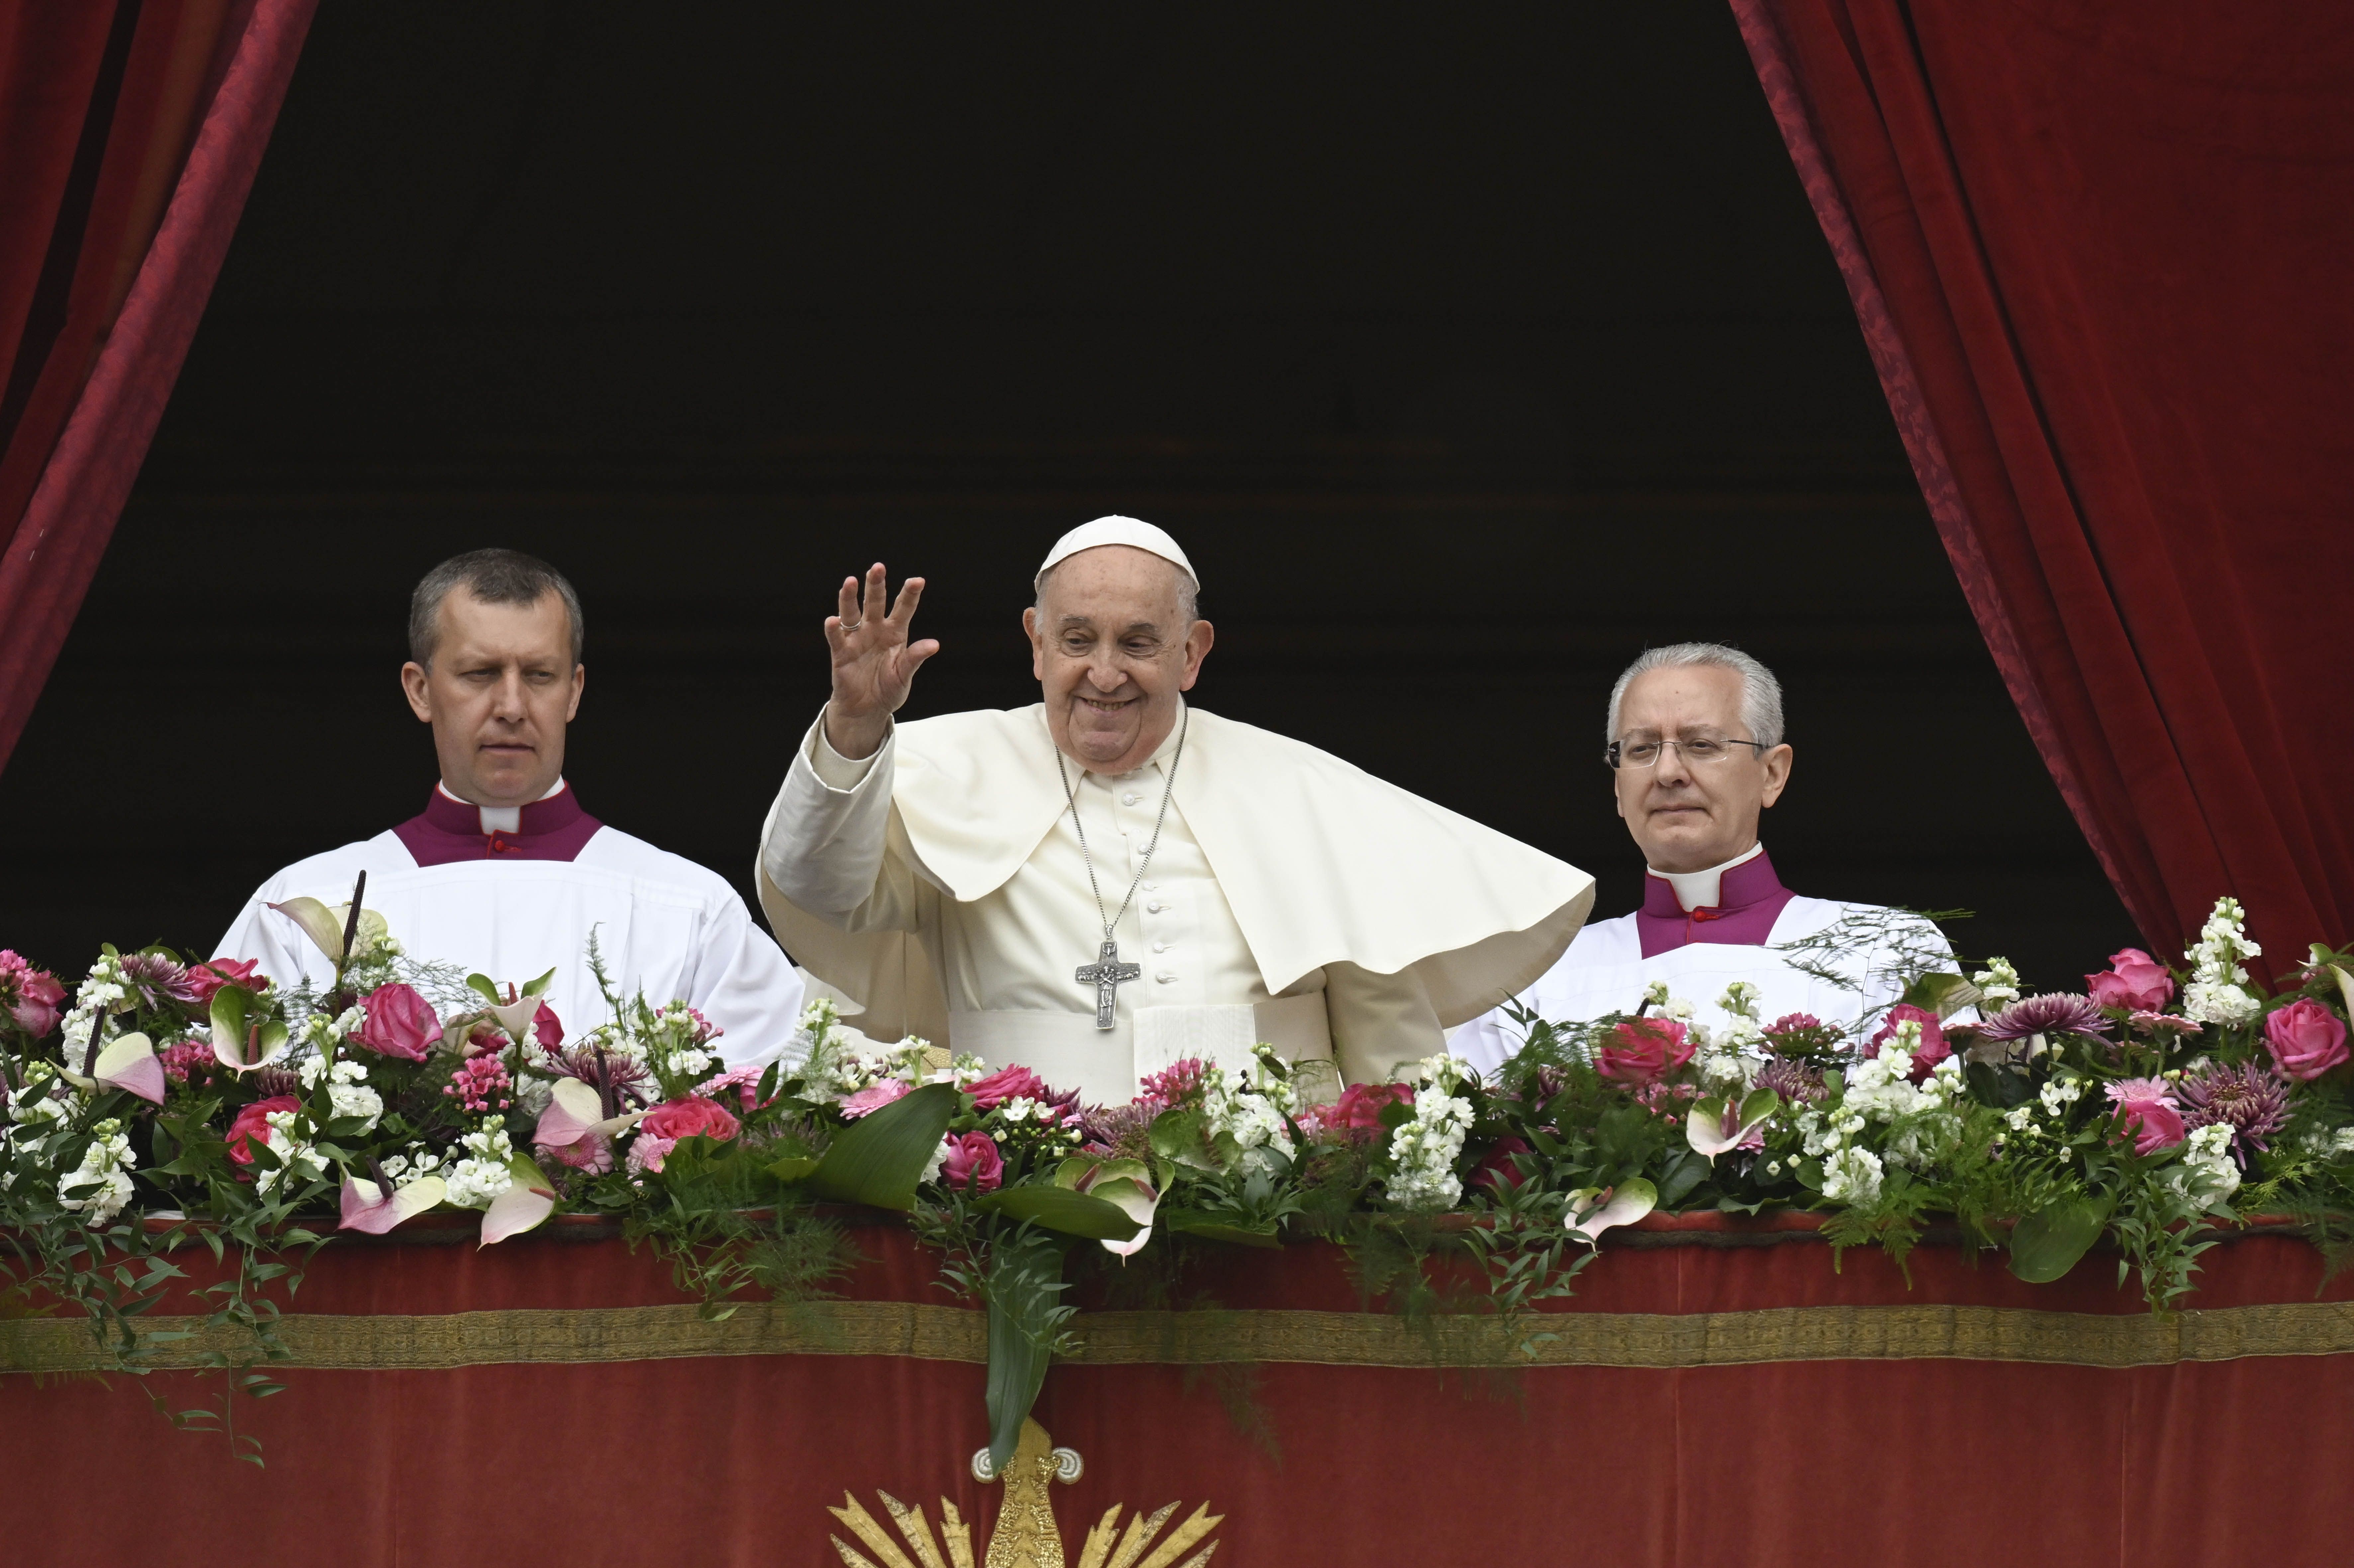 Pope Francis on Easter: May the risen Christ open a path of peace in the Holy Land